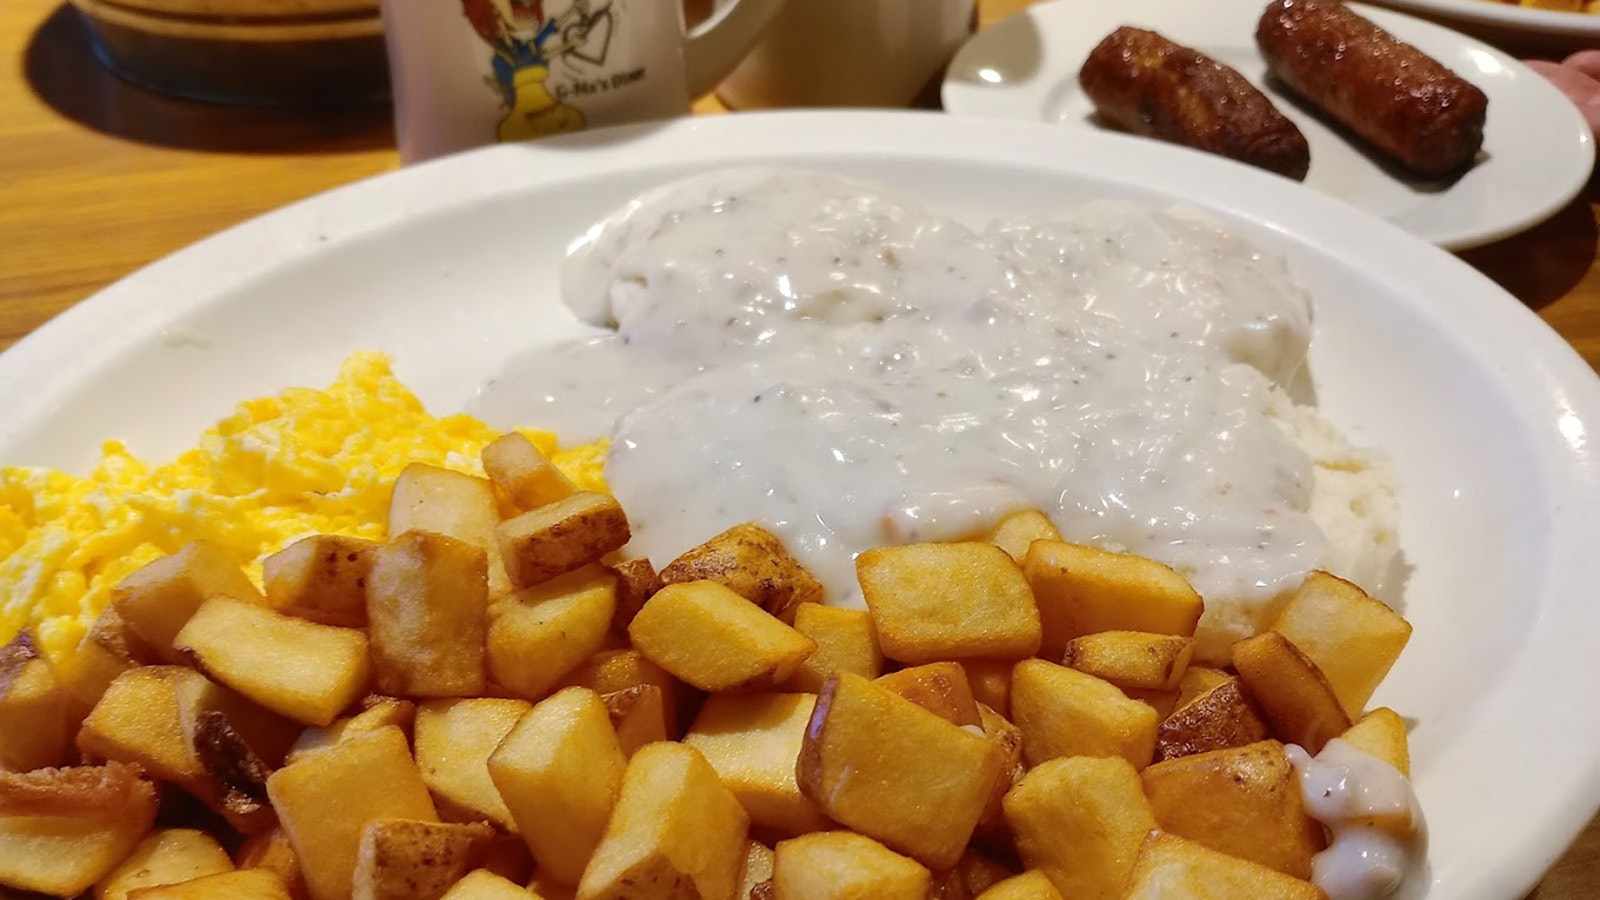 There's nothing like a classic diner breakfast, which is the specialty at G-Ma's Diner in Mills, Wyoming.